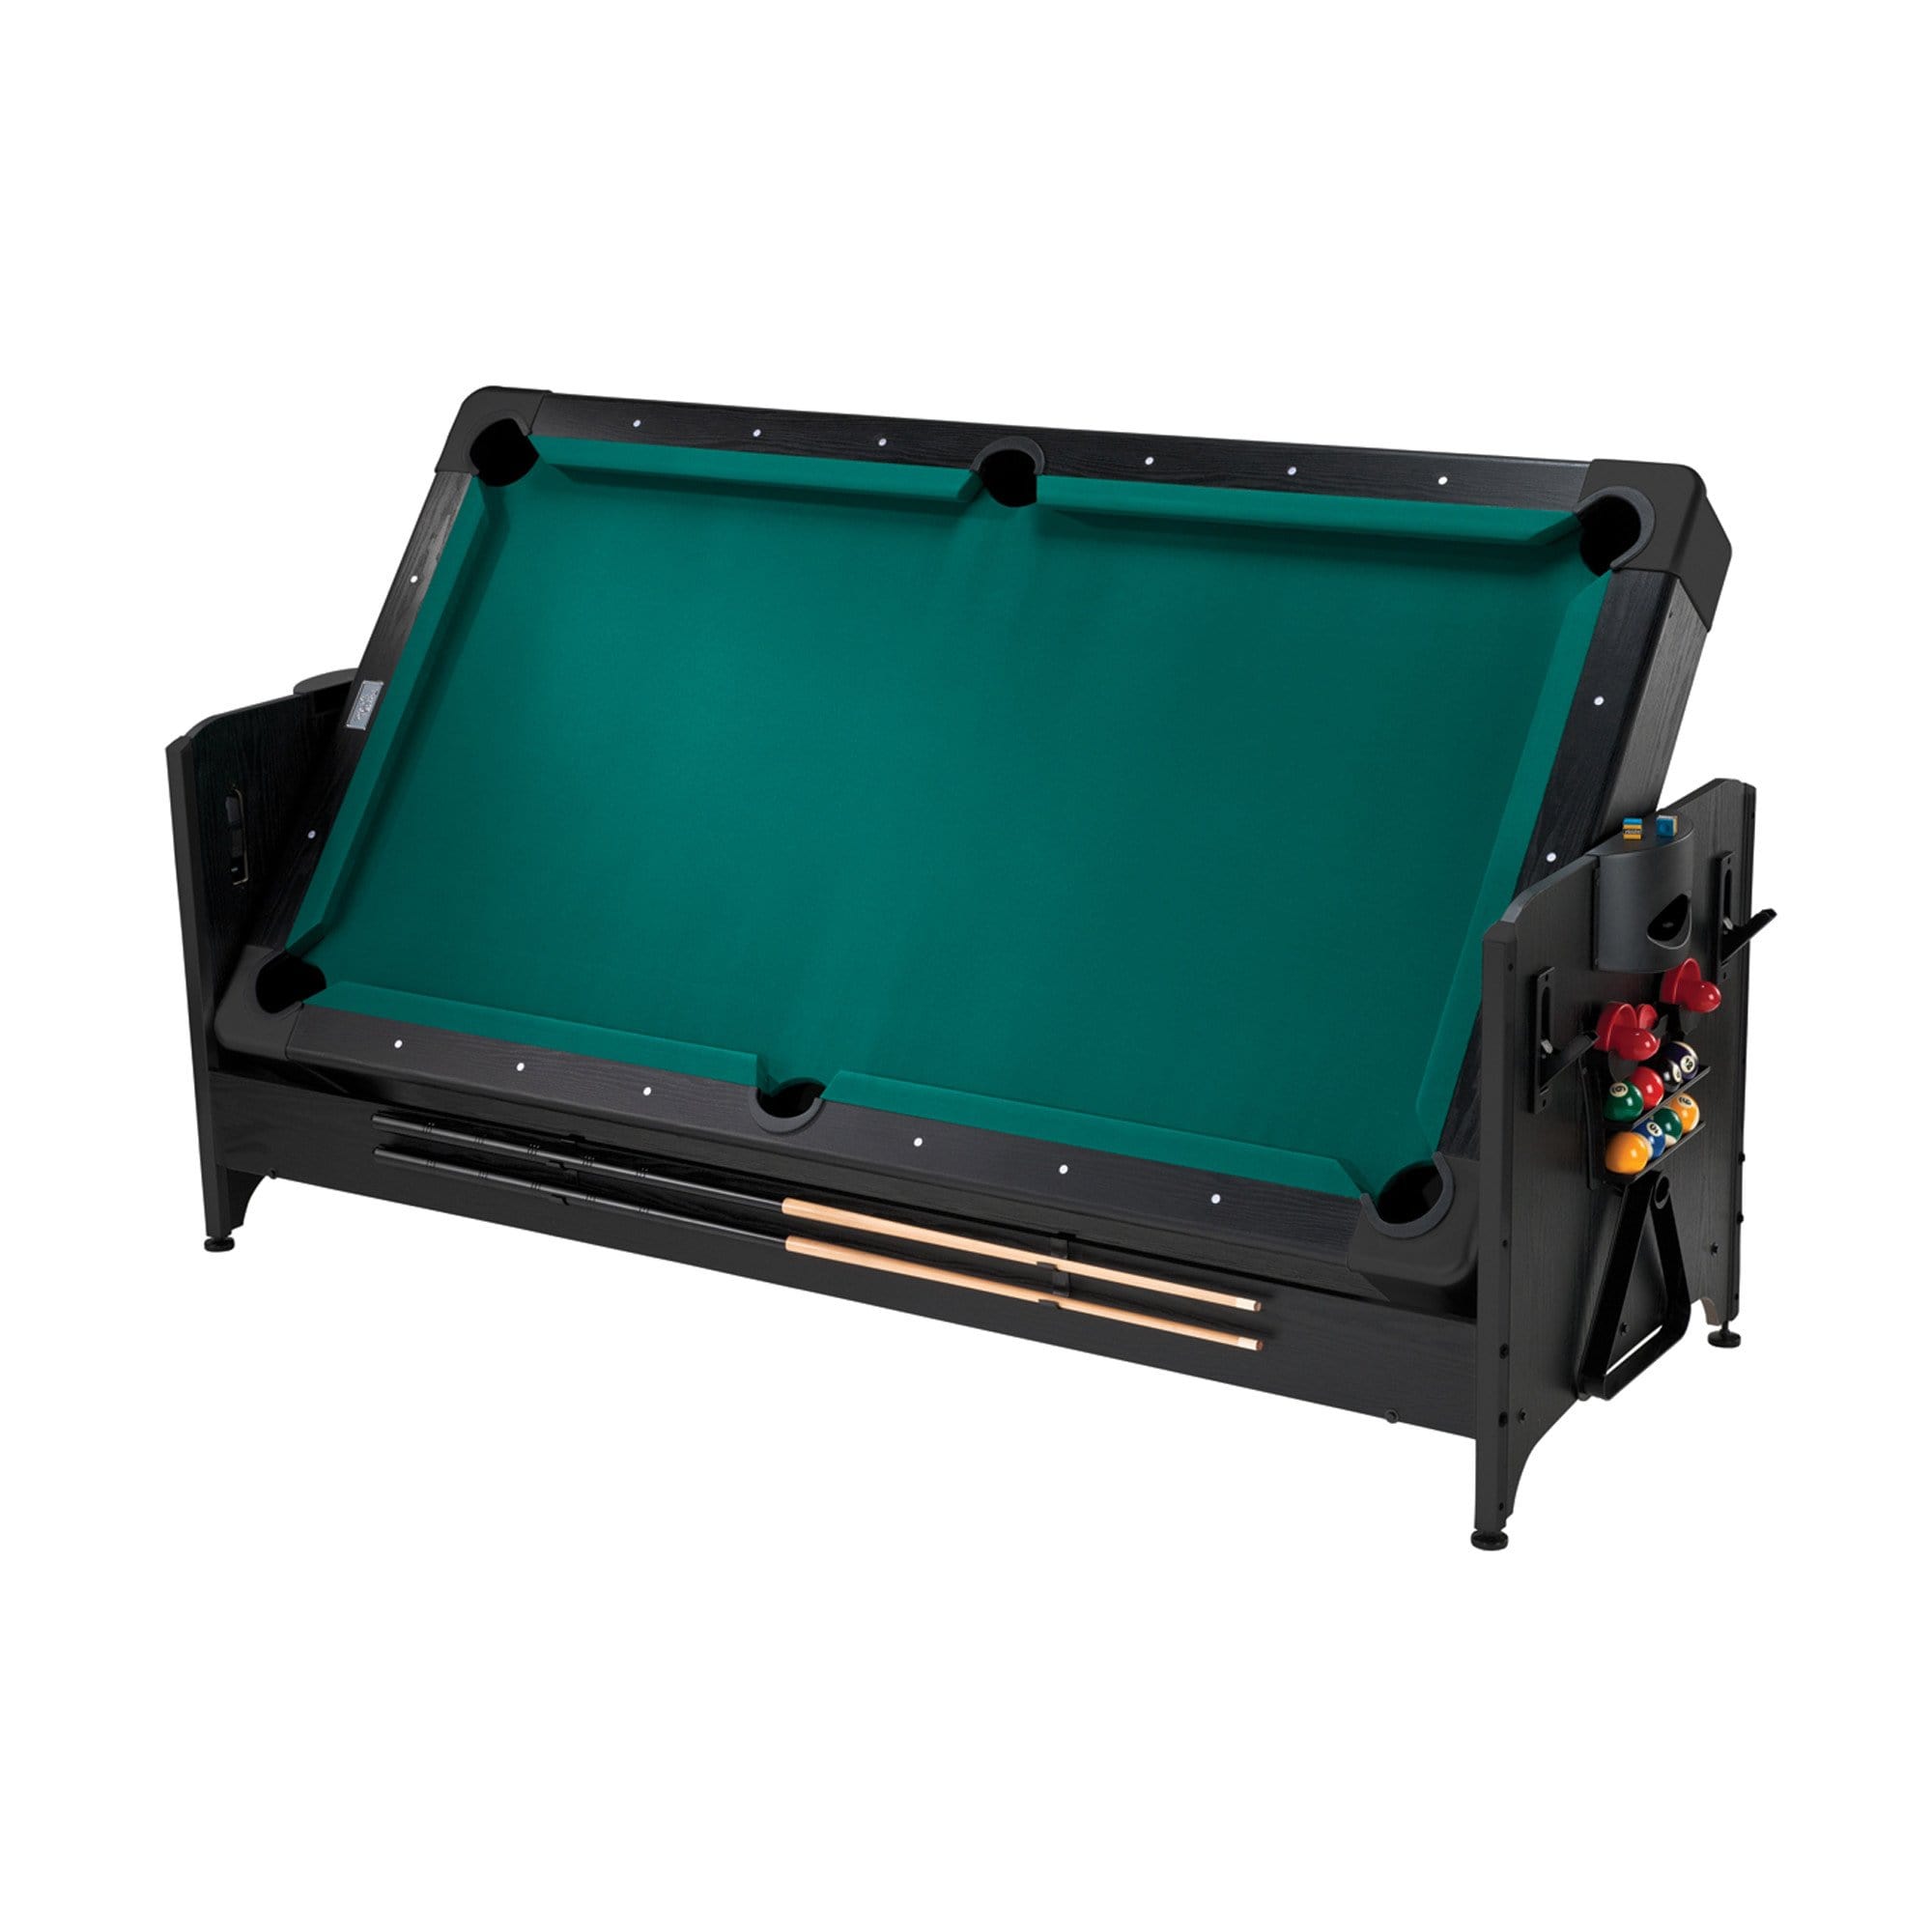 Fat Cat Multi-Game Tables Green / As shown Fat Cat Original 3-in-1 7' Pockey Multi-Game Table